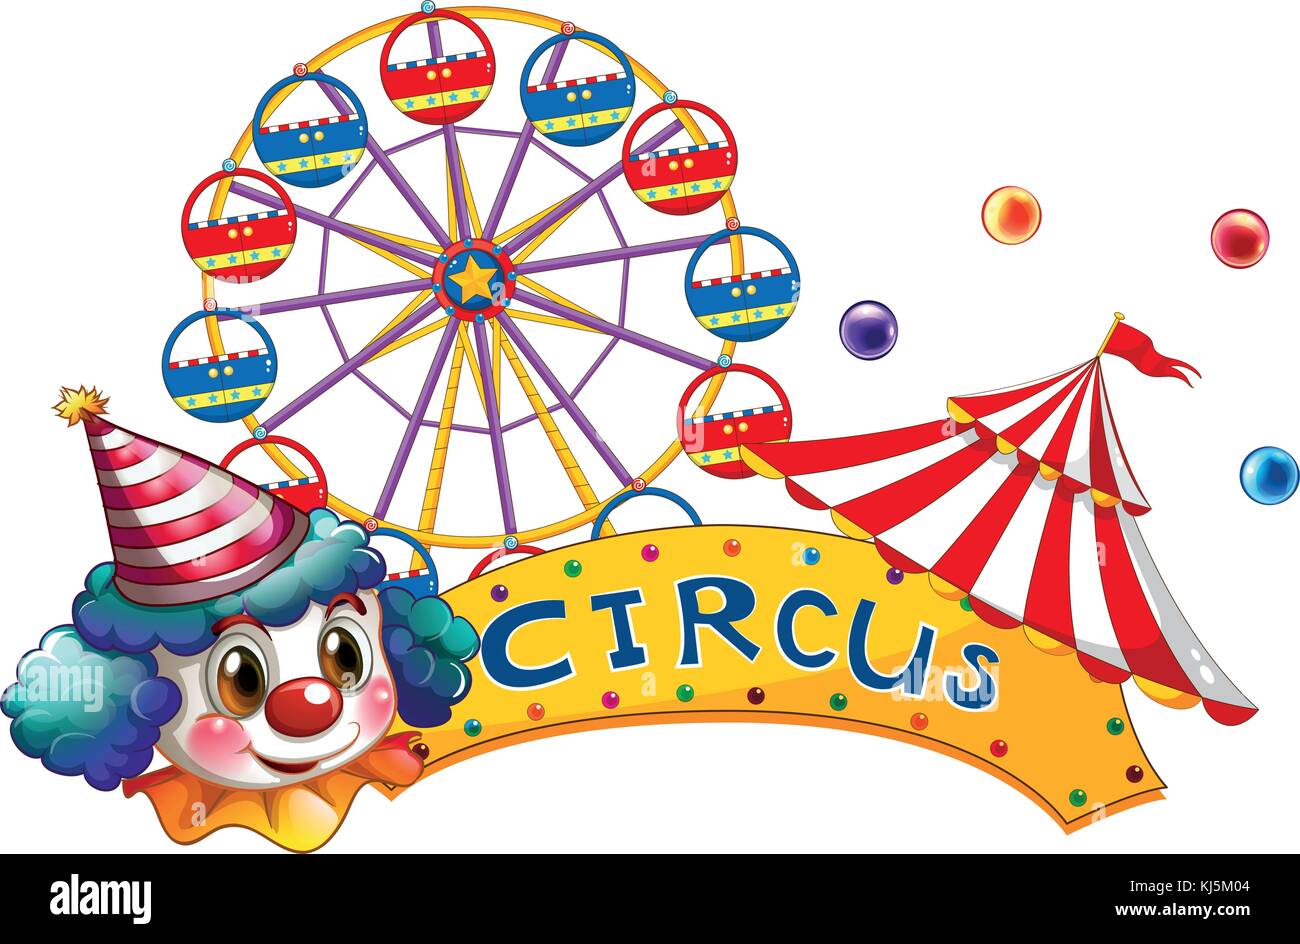 Illustration of a circus signboard with a clown and a tent on a white background Stock Vector